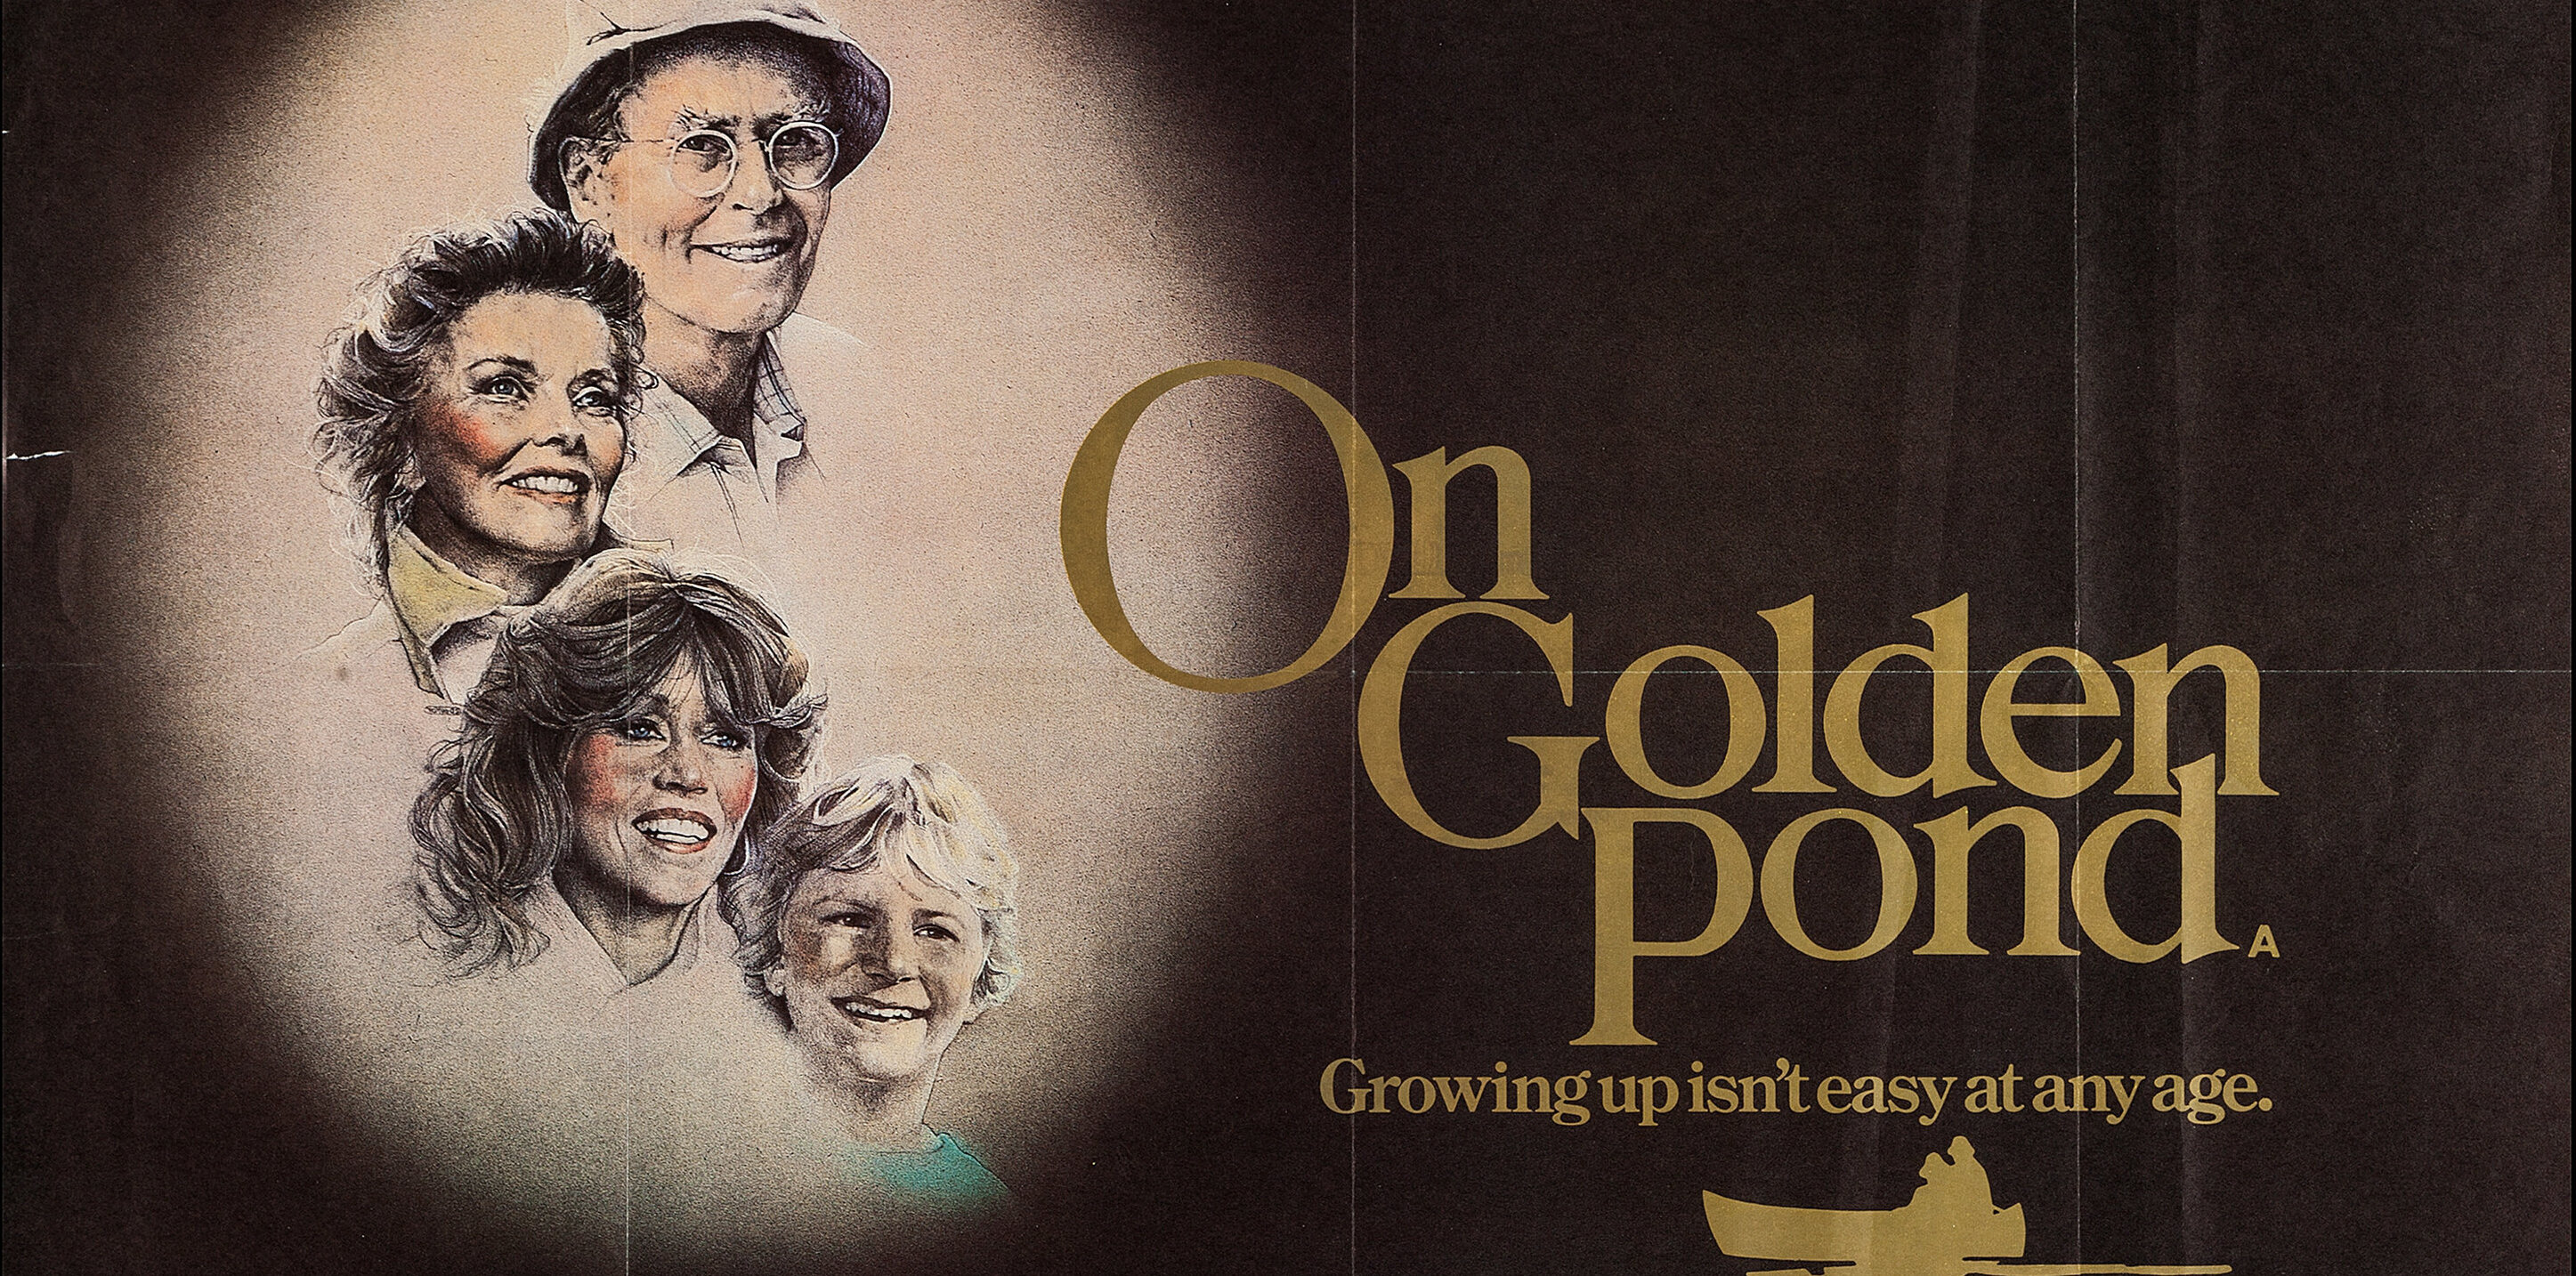 36-facts-about-the-movie-on-golden-pond